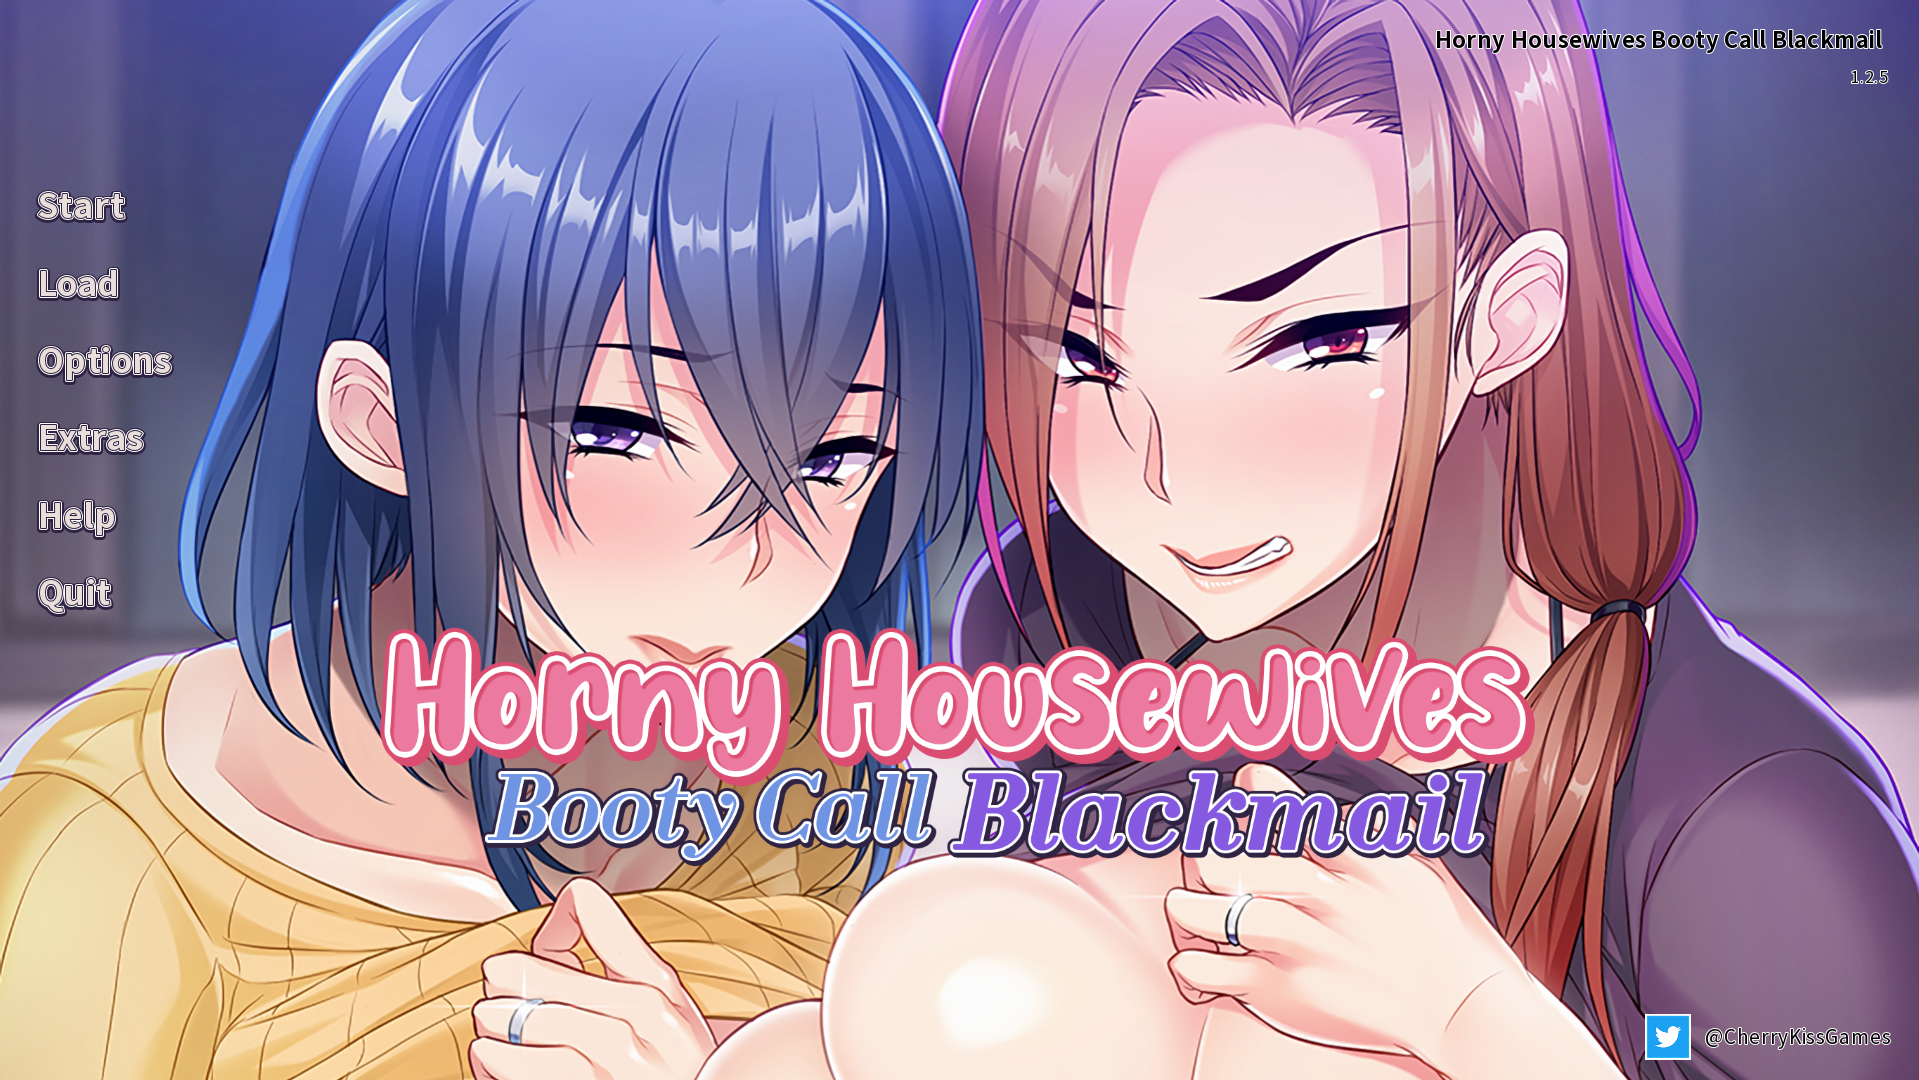 Horny Housewives Booty Call Blackmail COMPLETED - free game download, reviews, mega image